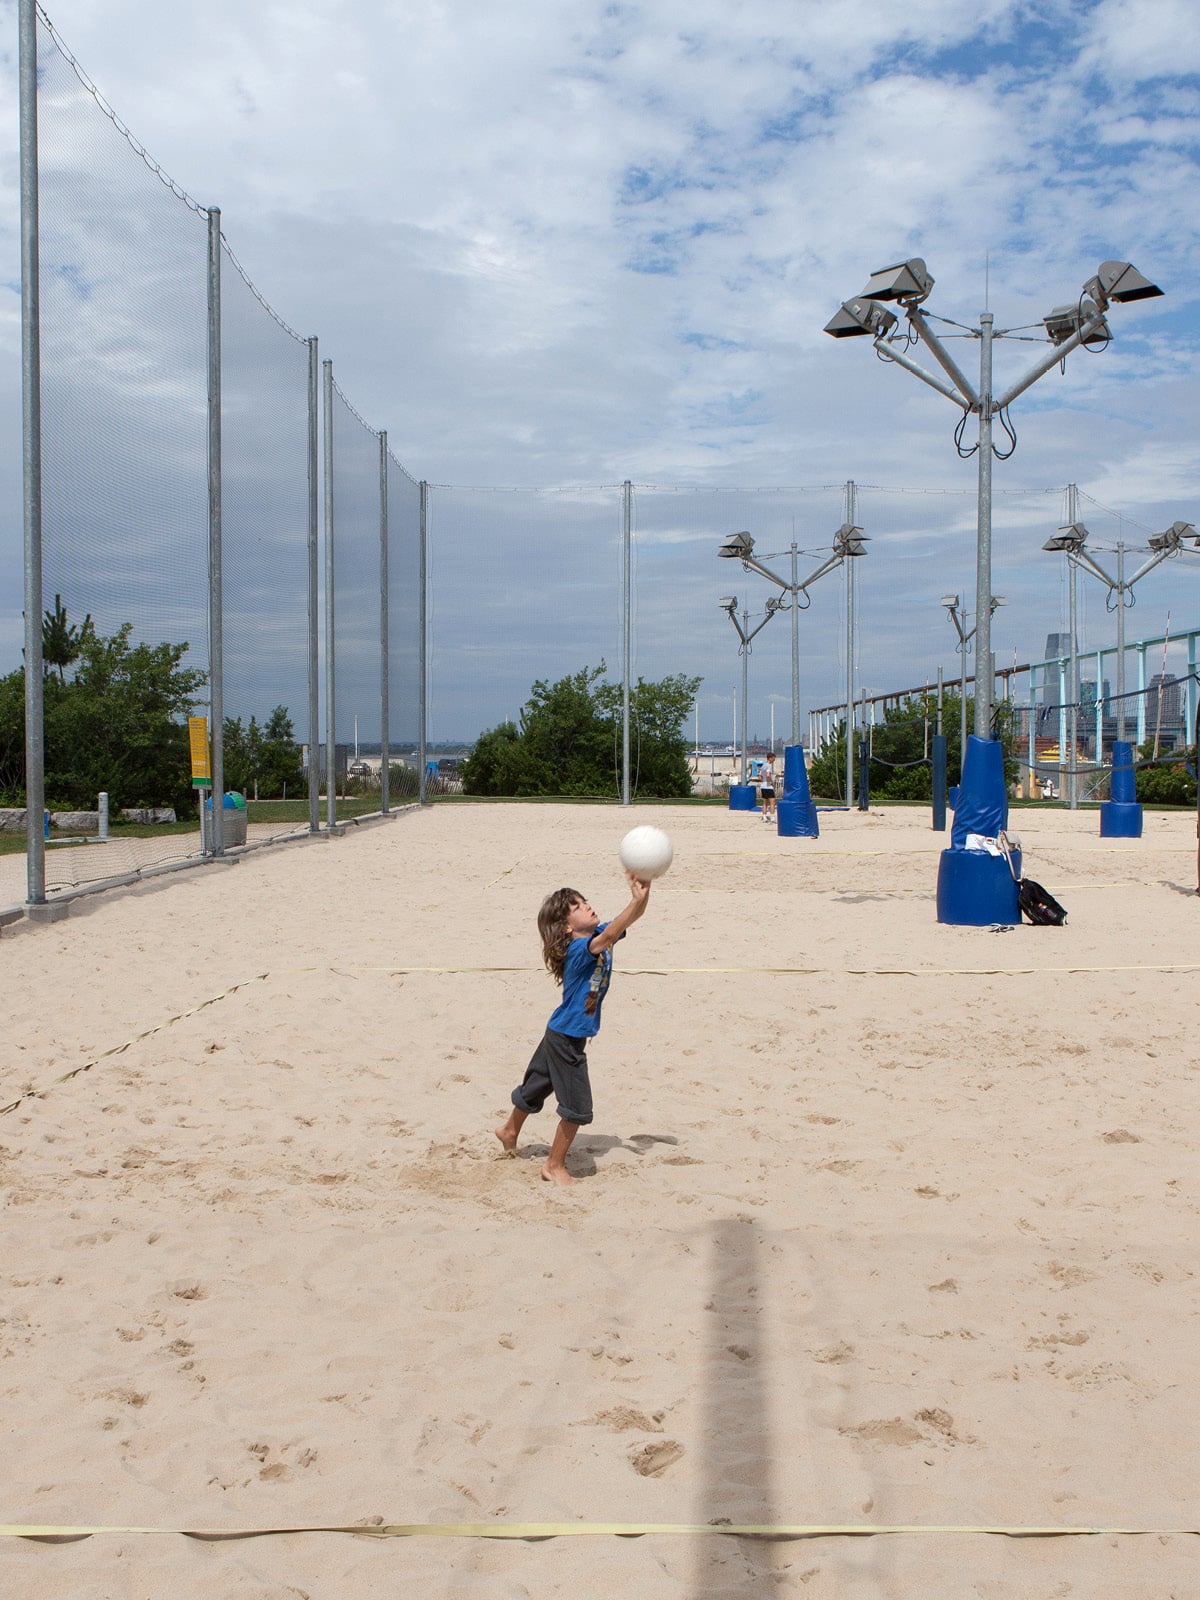 Small child hitting volleyball on a sand court at Pier 6 on a sunny day.